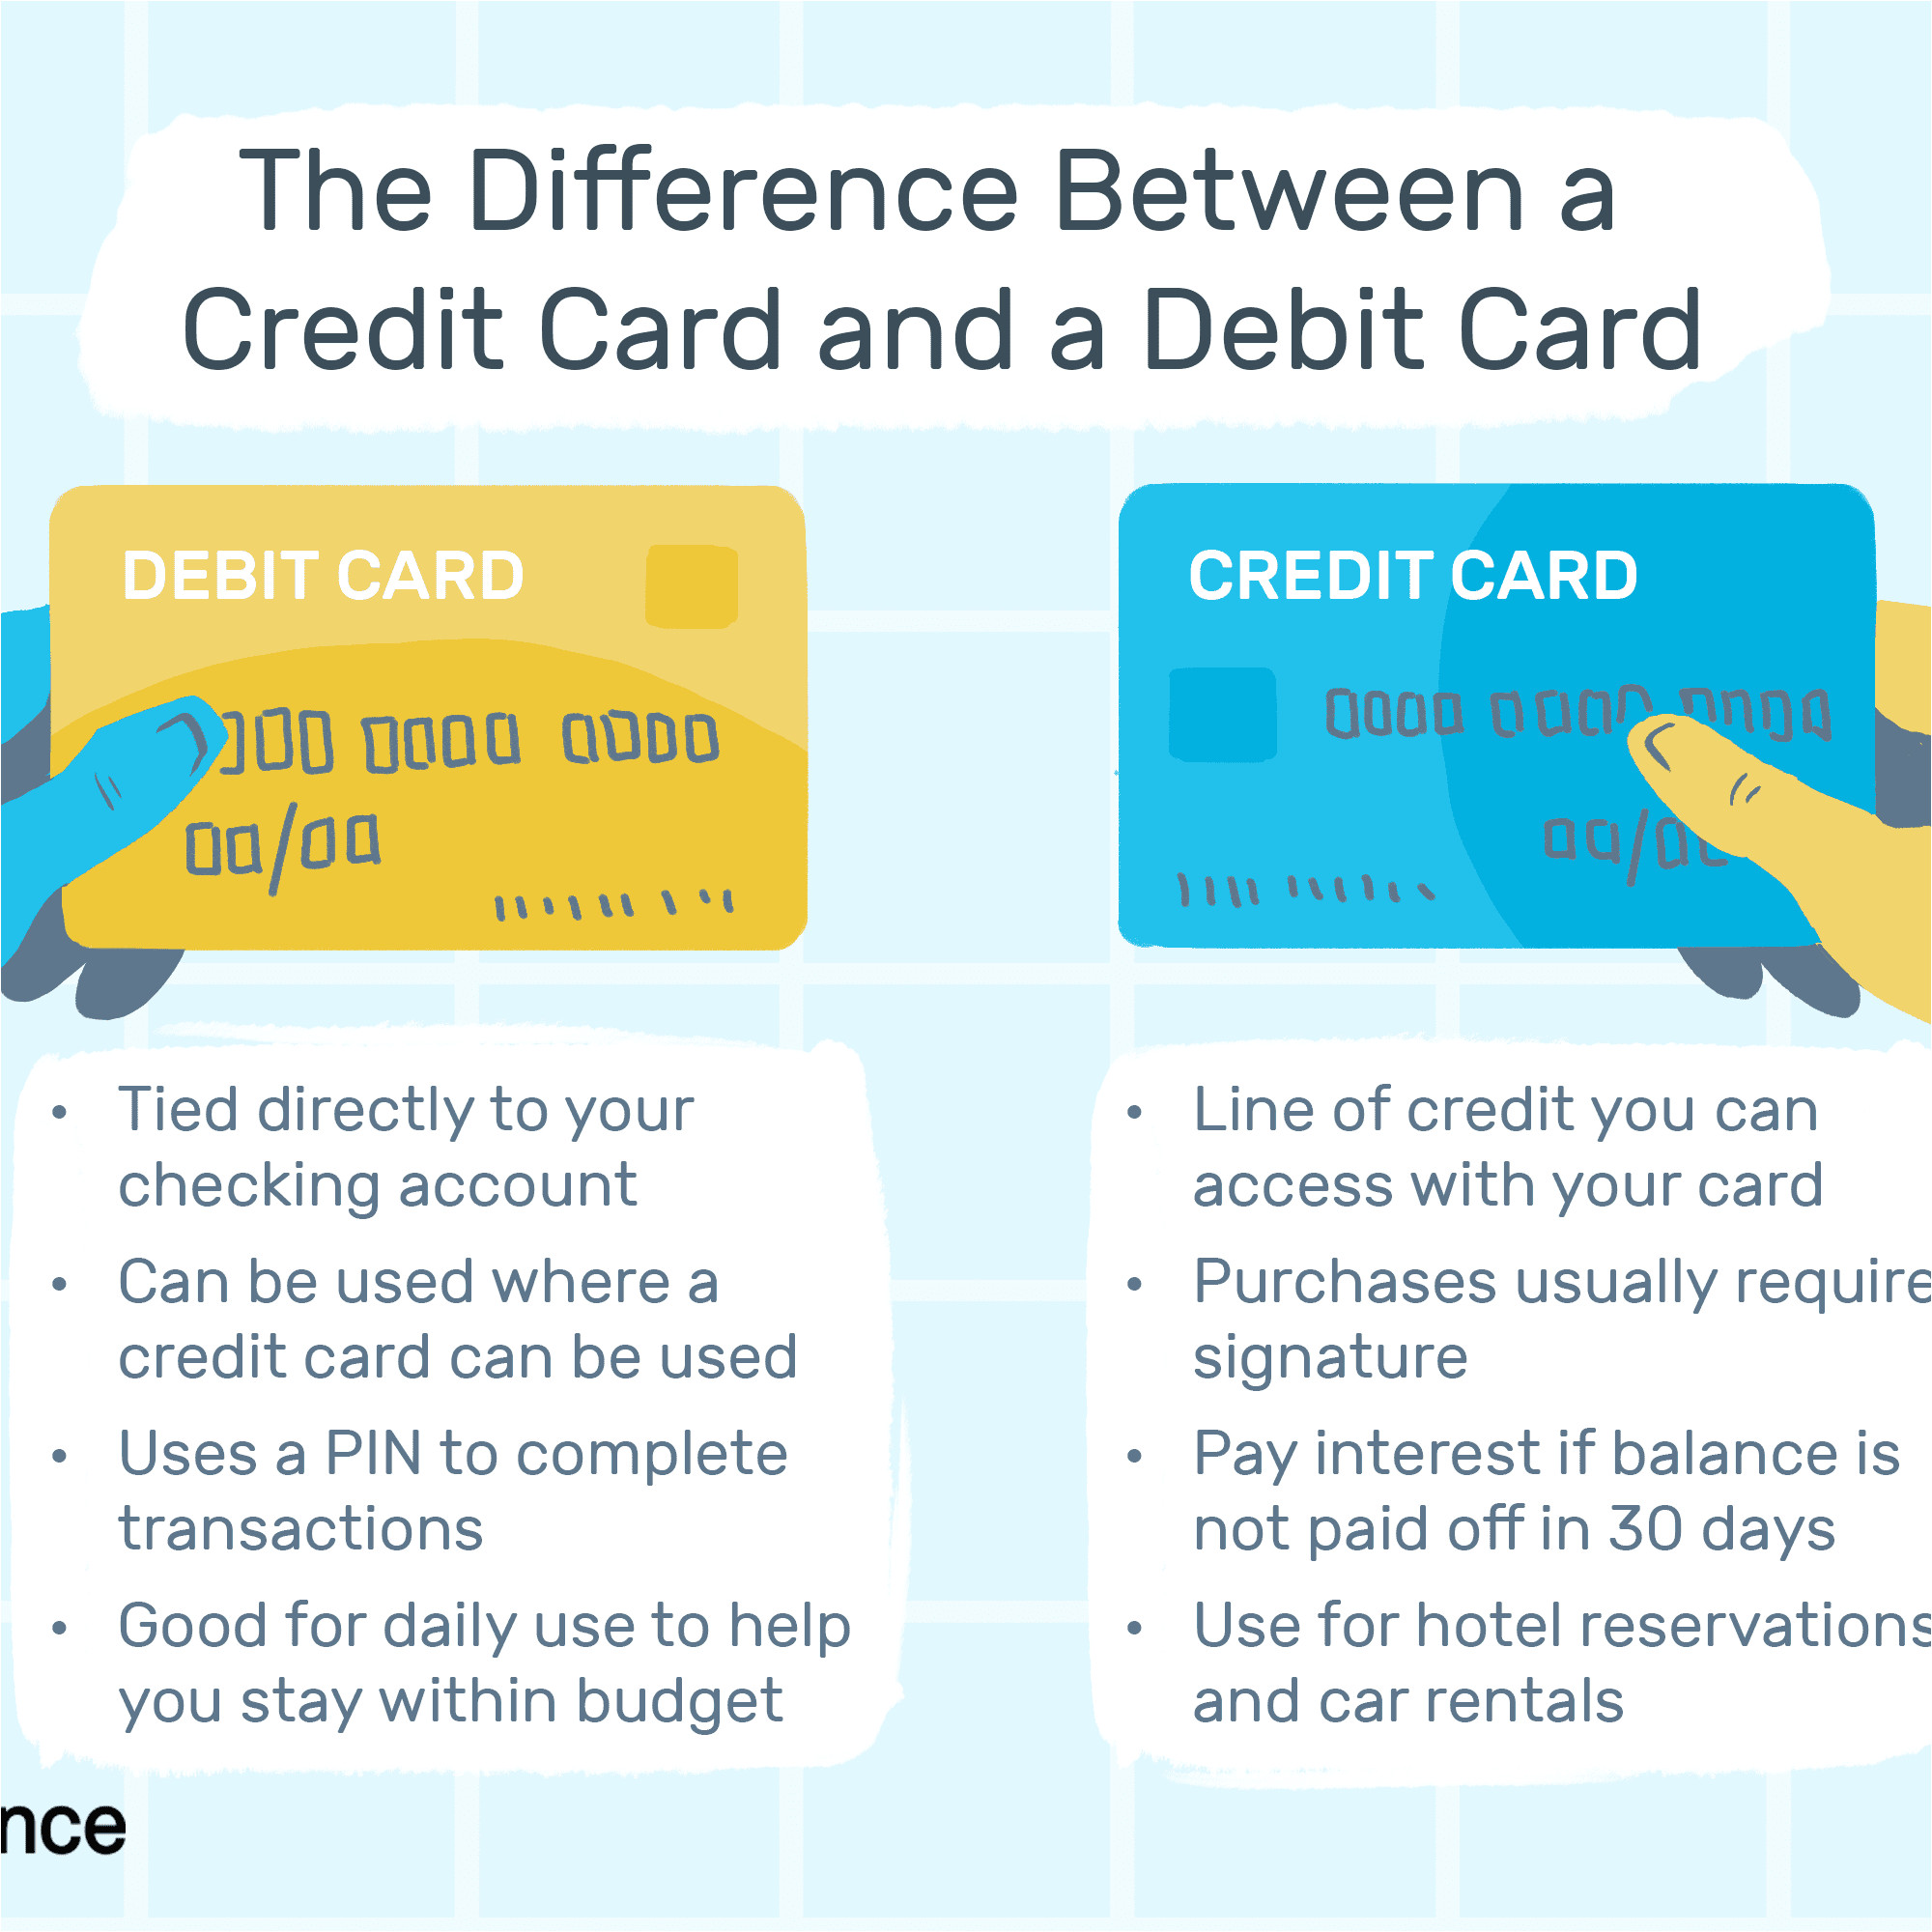 difference between a credit card and a debit card 2385972 final 5c4731cbc9e77c00018a49e9 png